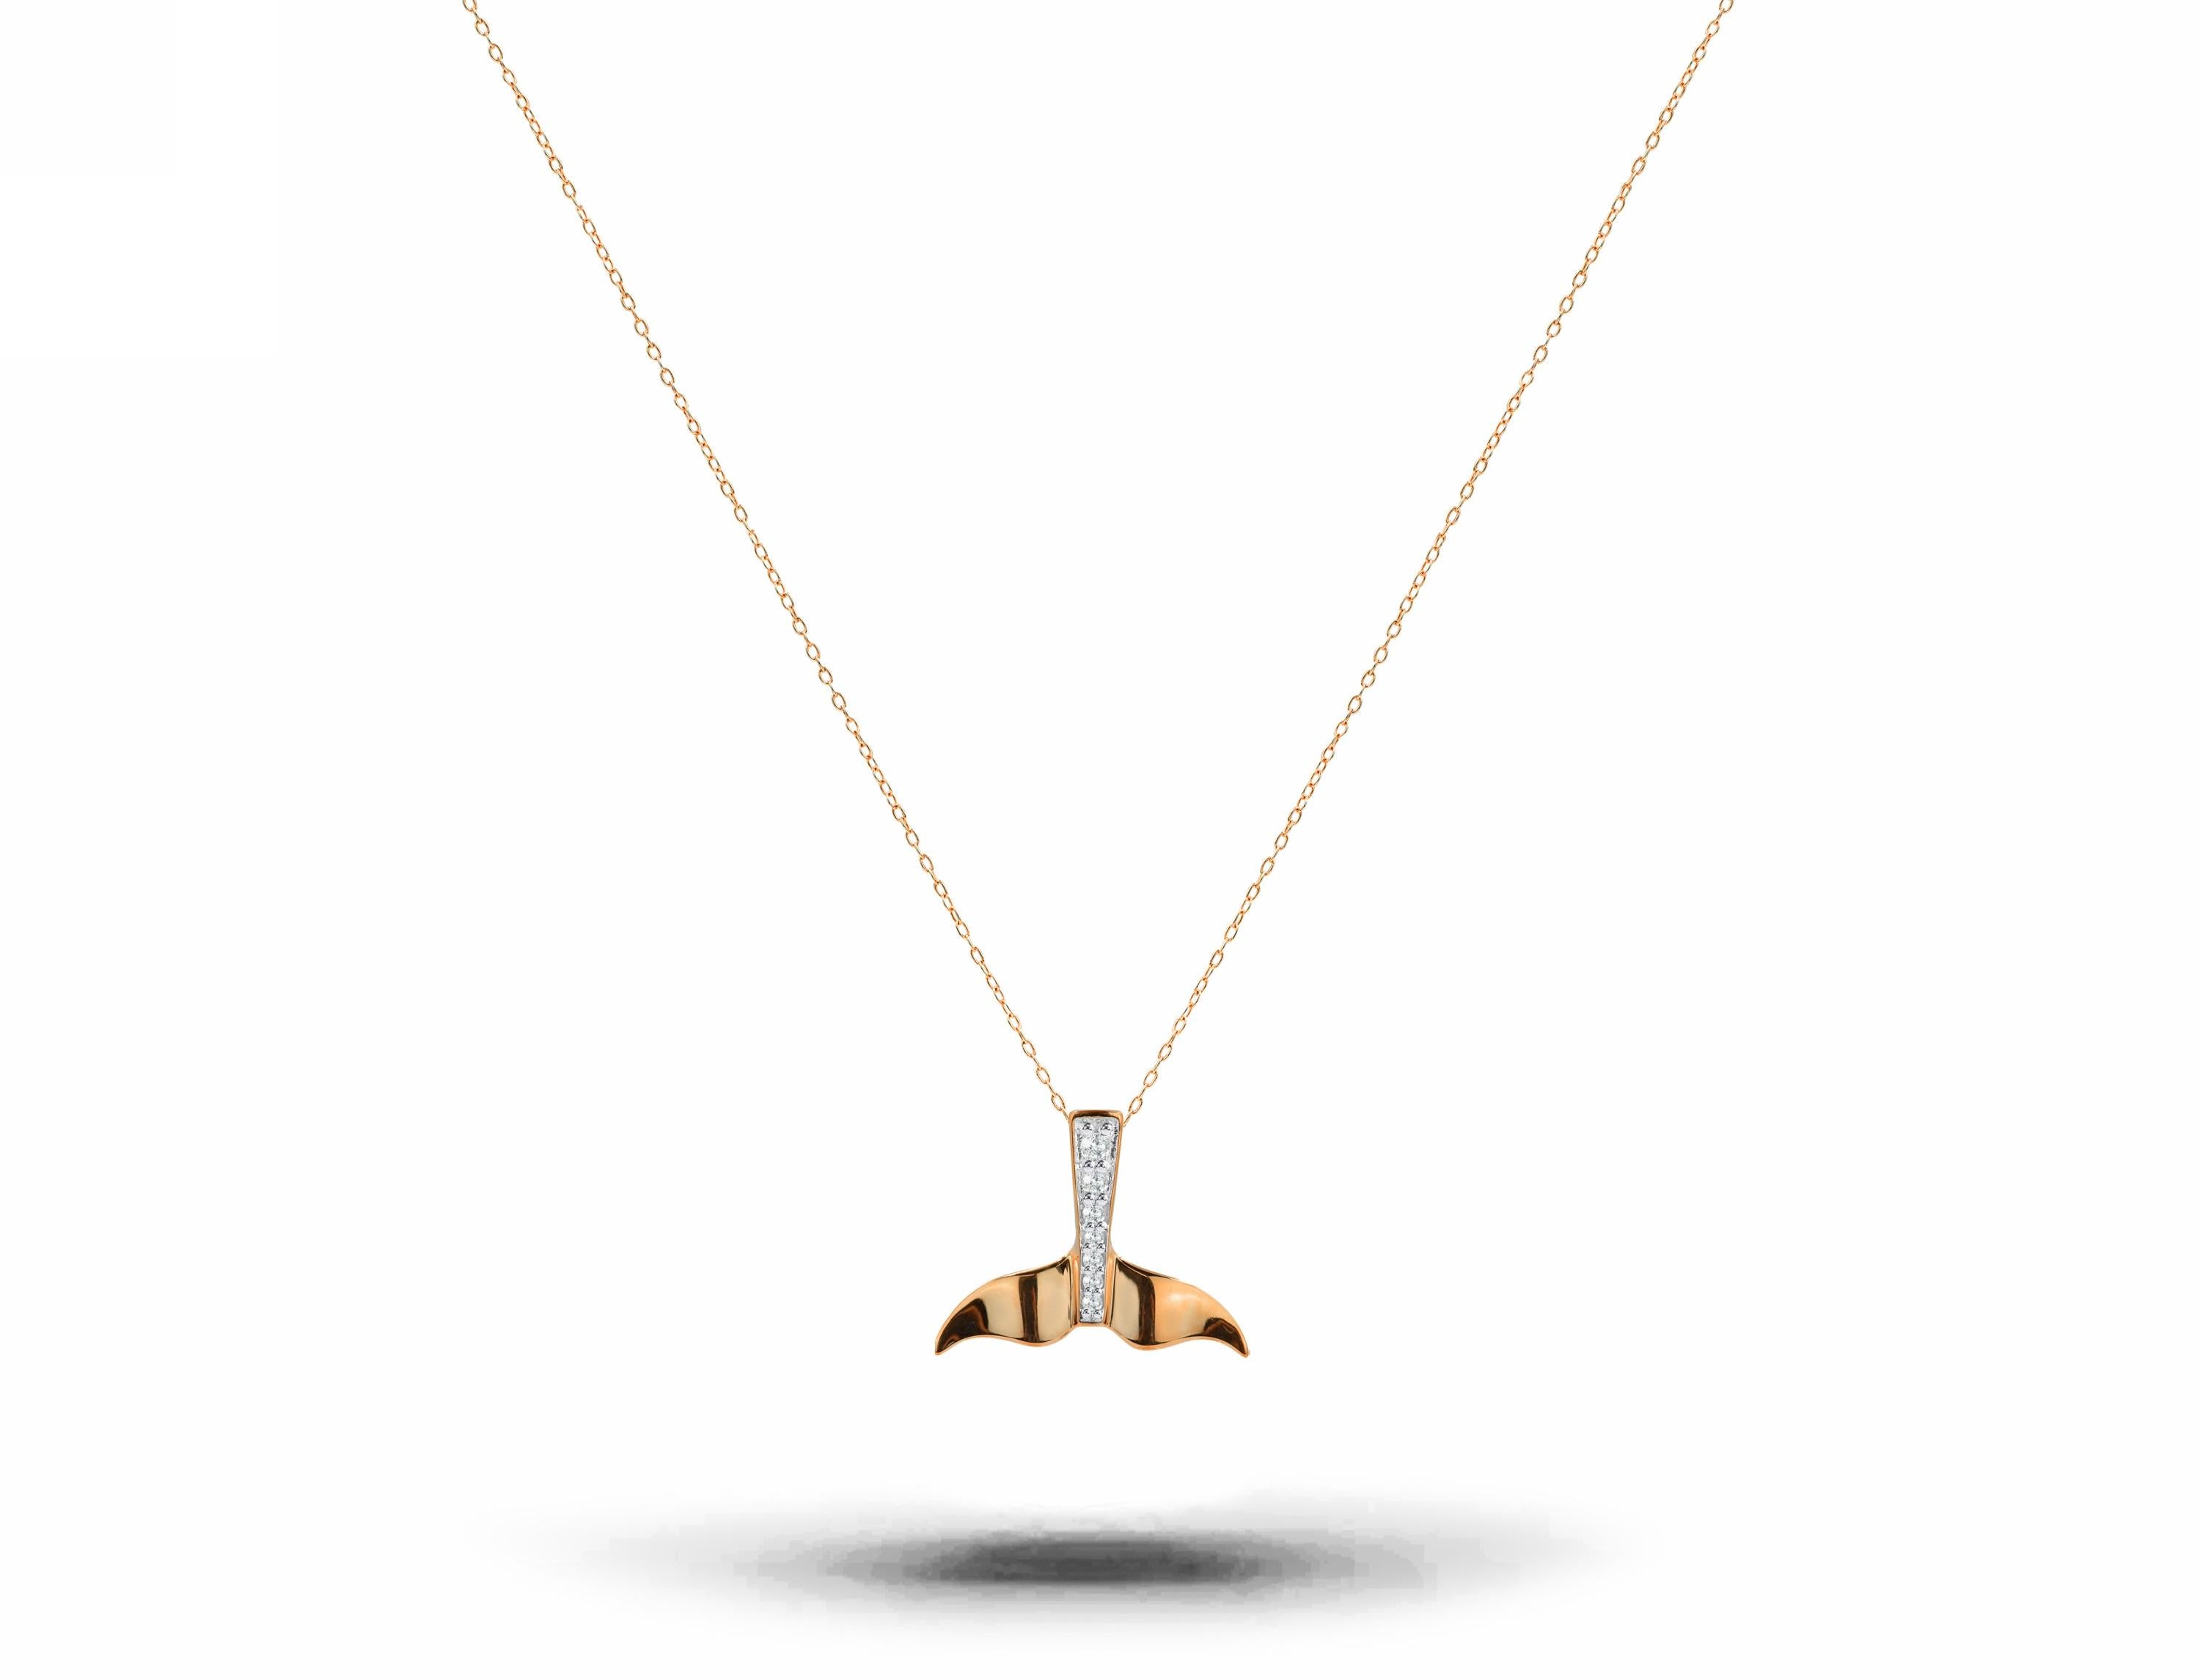 Diamond Fish Tail Necklace in 18k Rose Gold / White Gold / Yellow Gold.

Delicate dainty fish tail charm necklace with natural diamond set in 18k solid gold. This Modern minimalist necklace is a perfect gift for loved once and perfect to wear any